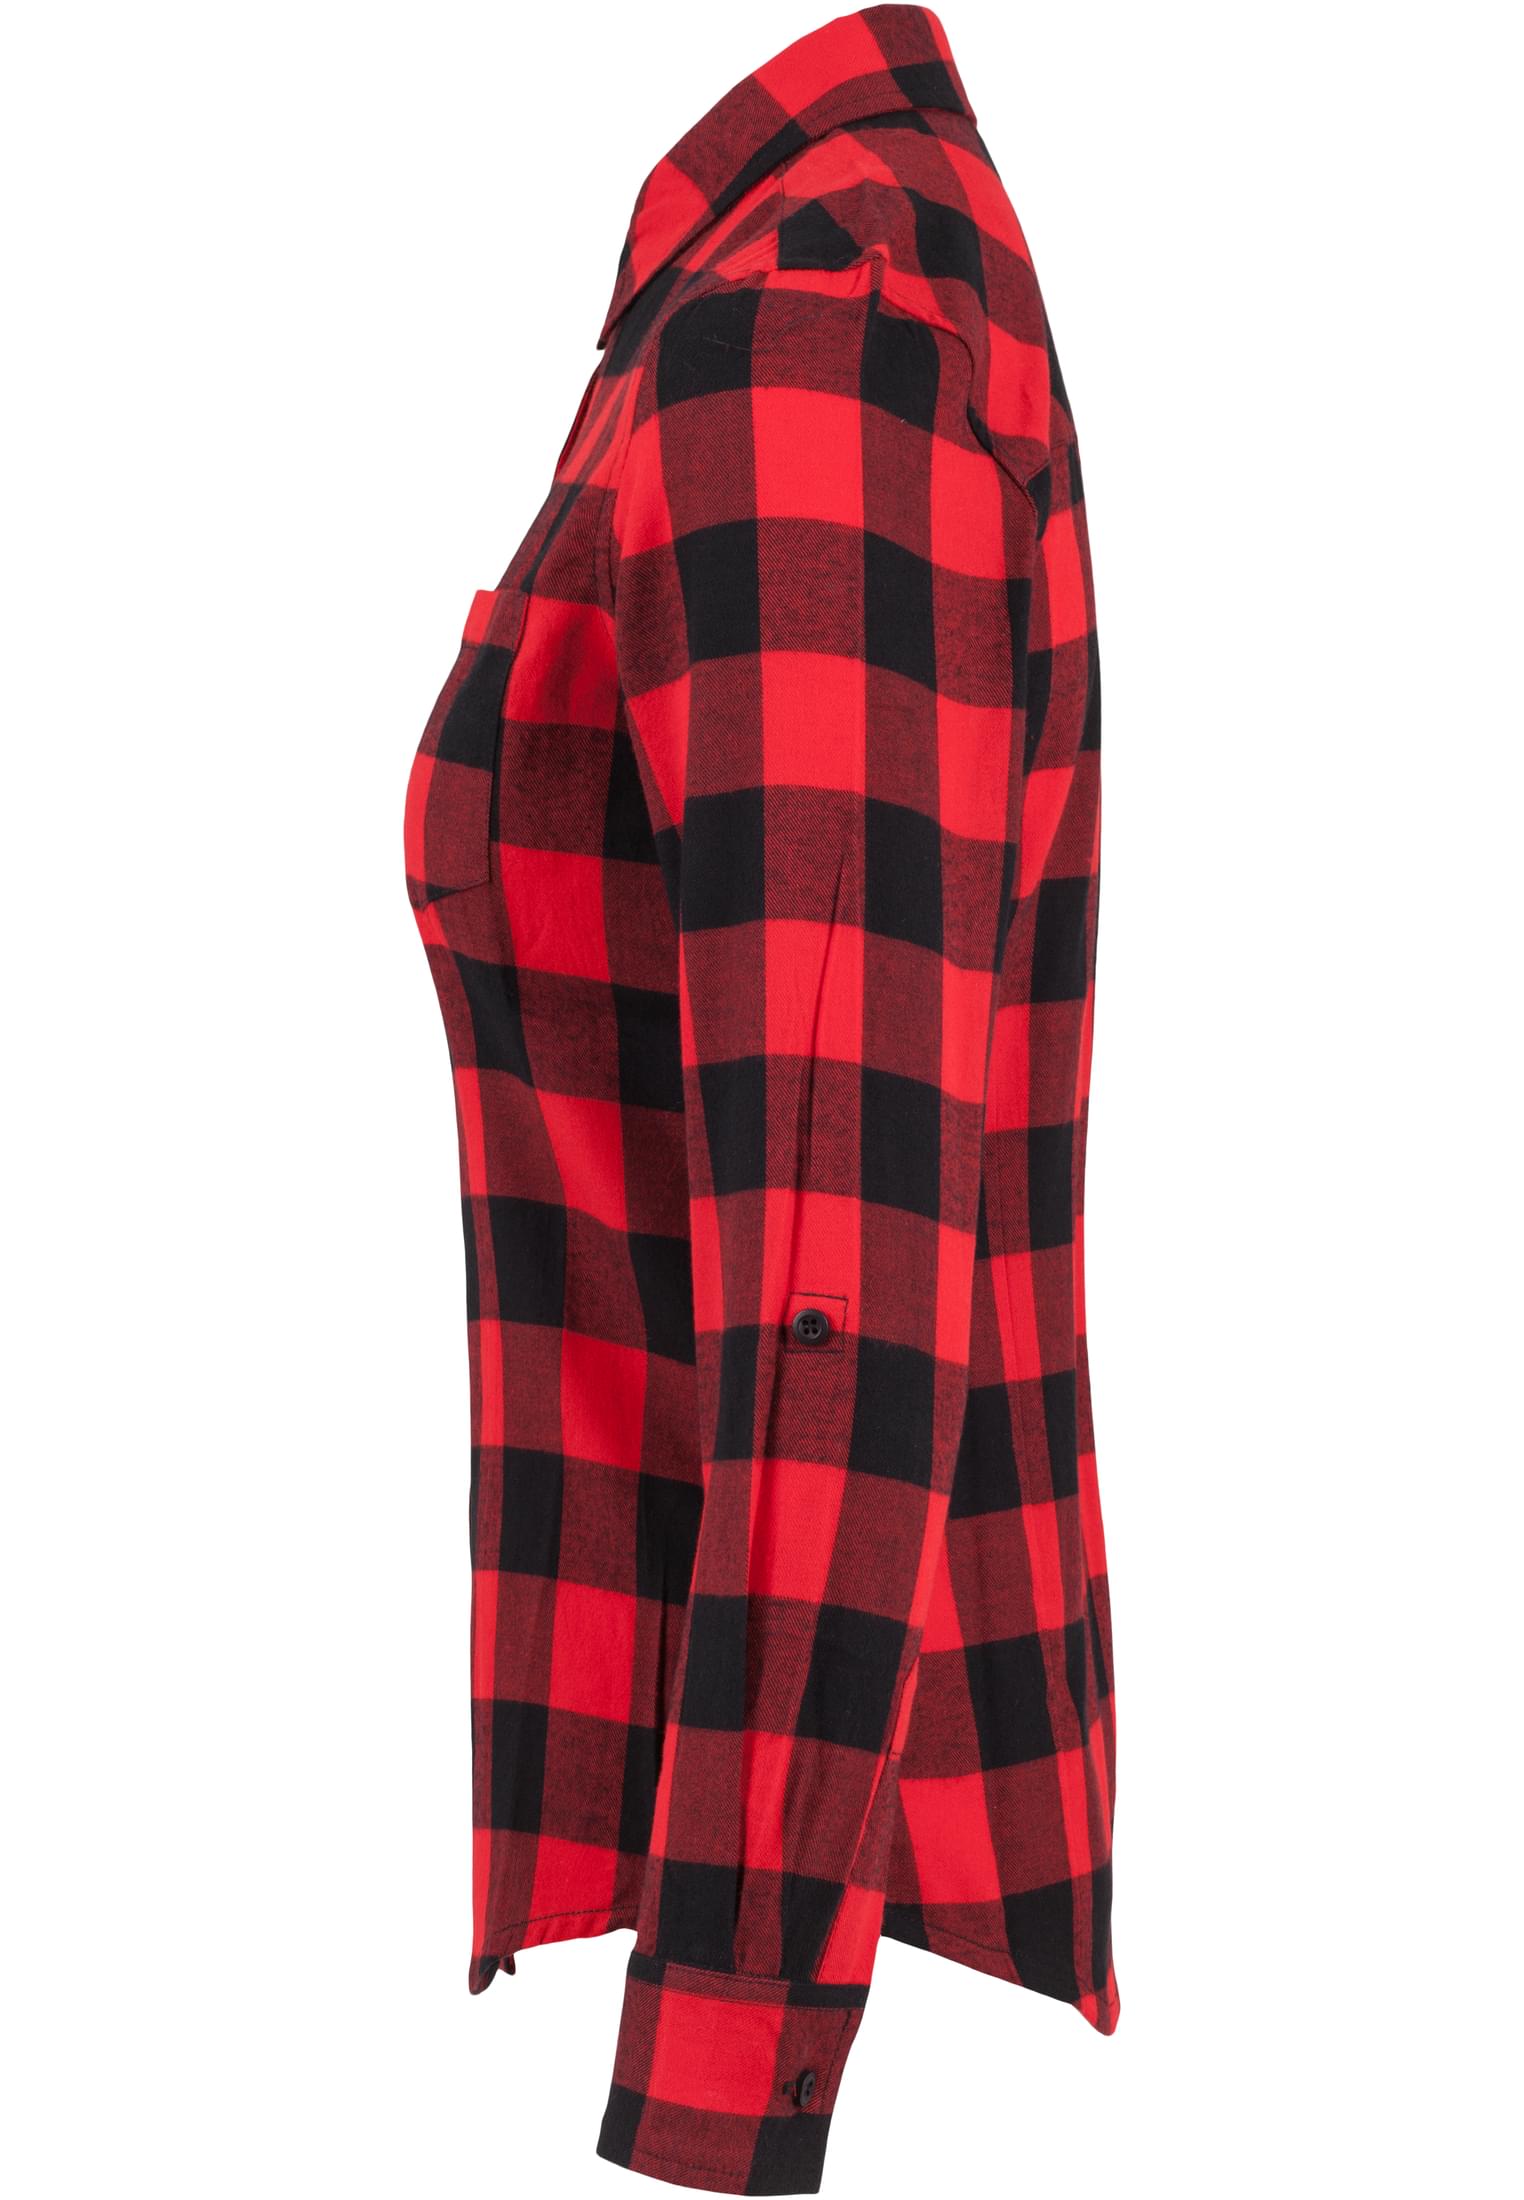 Damen Ladies Turnup Checked Flanell Shirt in Farbe blk/red